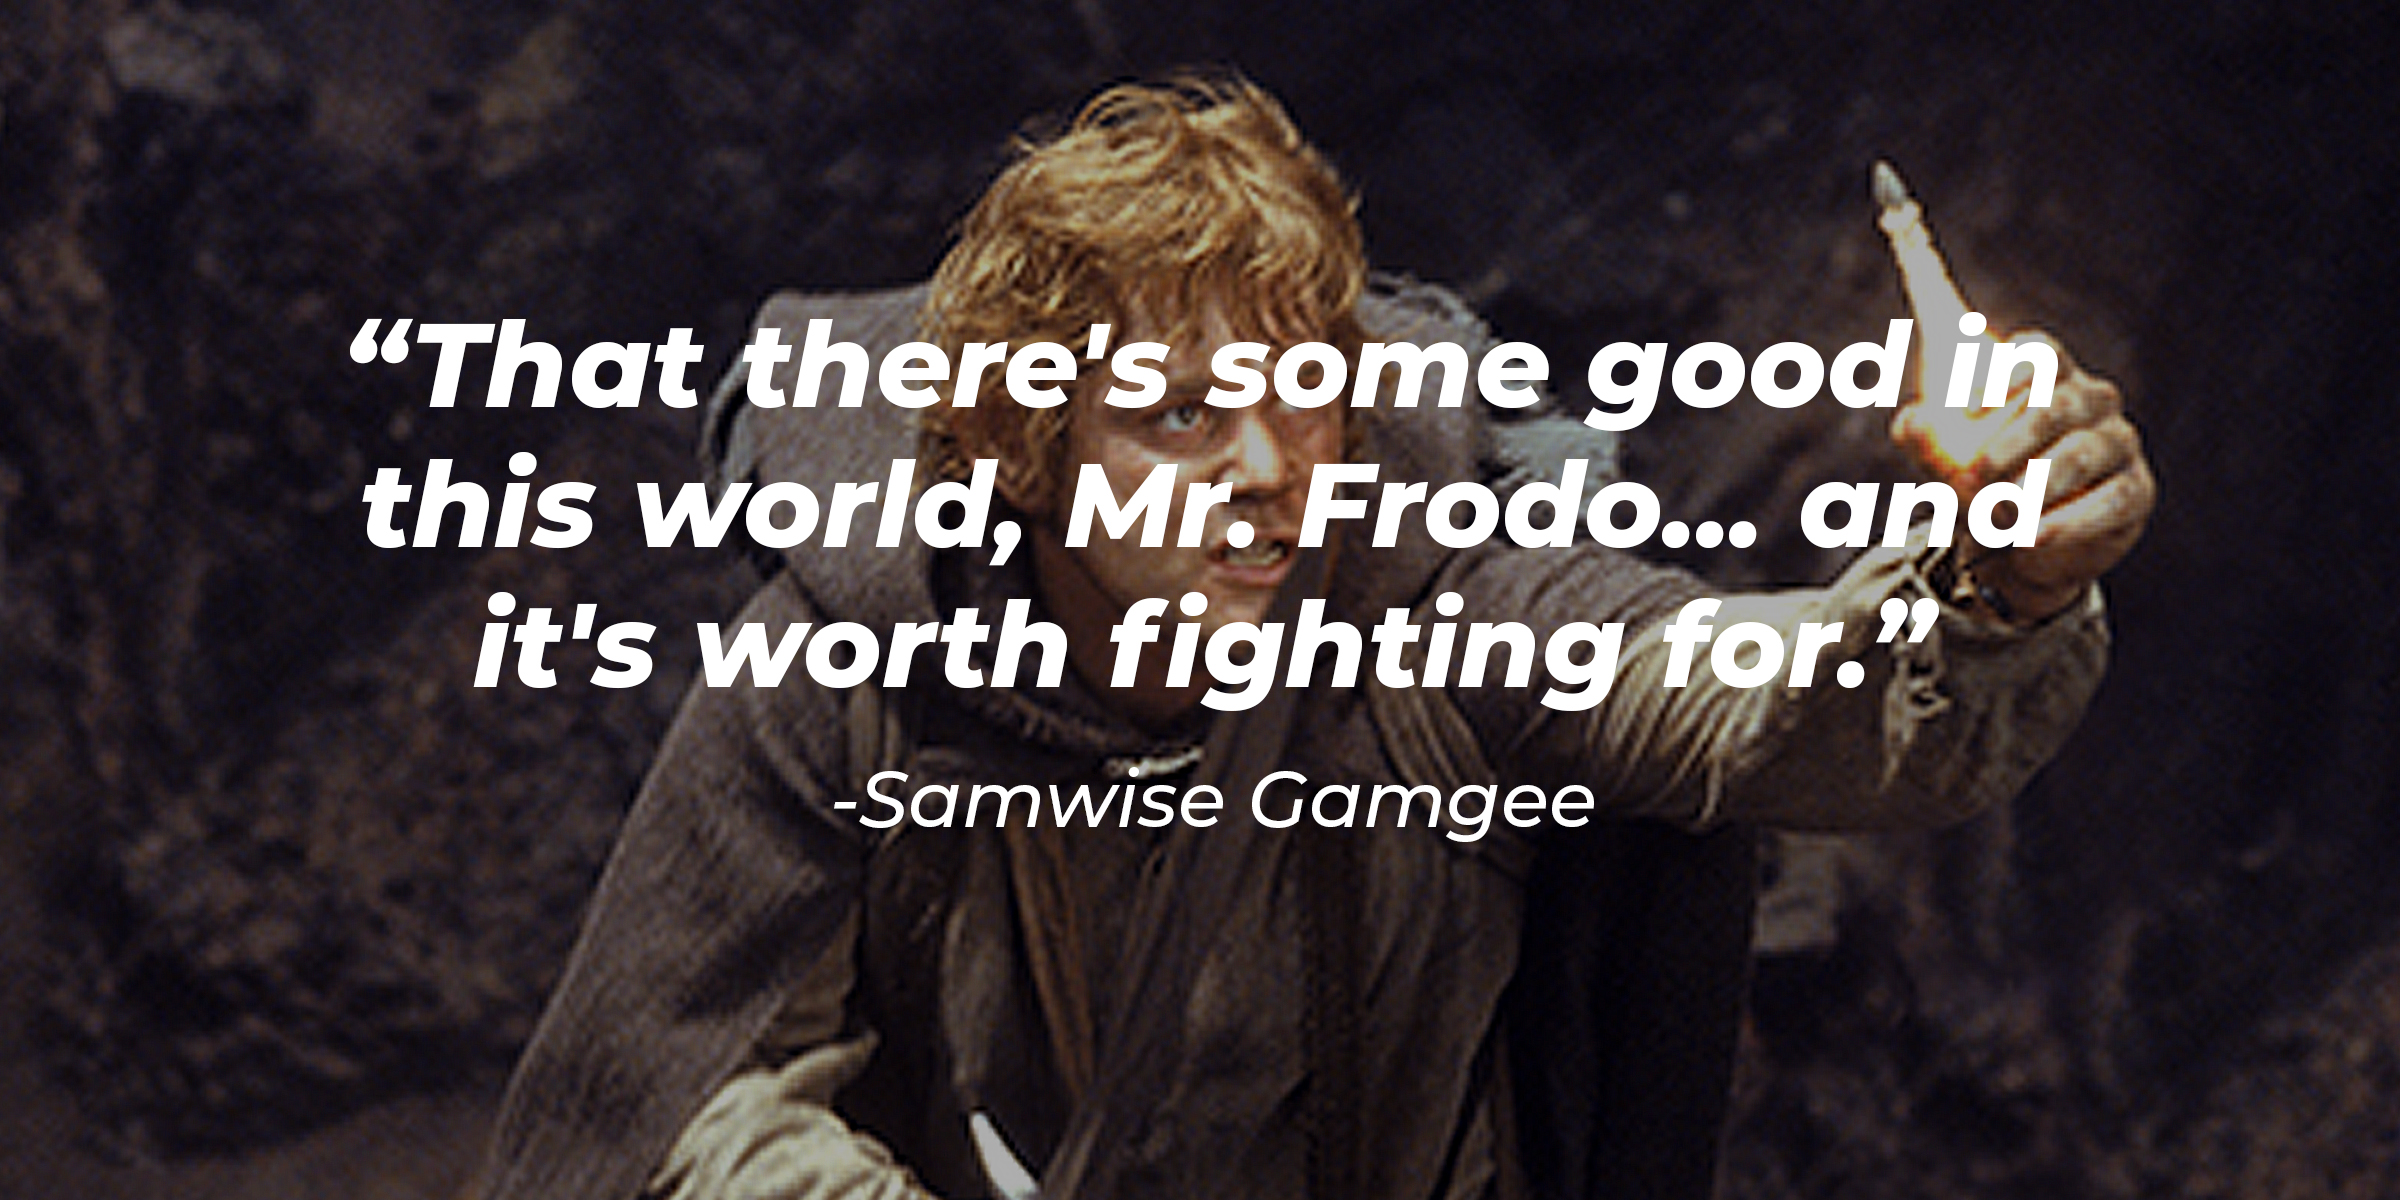 Samwise Gamgee's quote: “That there's some good in this world, Mr. Frodo... and it's worth fighting for.” | Source: facebook.com/lordoftheringstrilogy